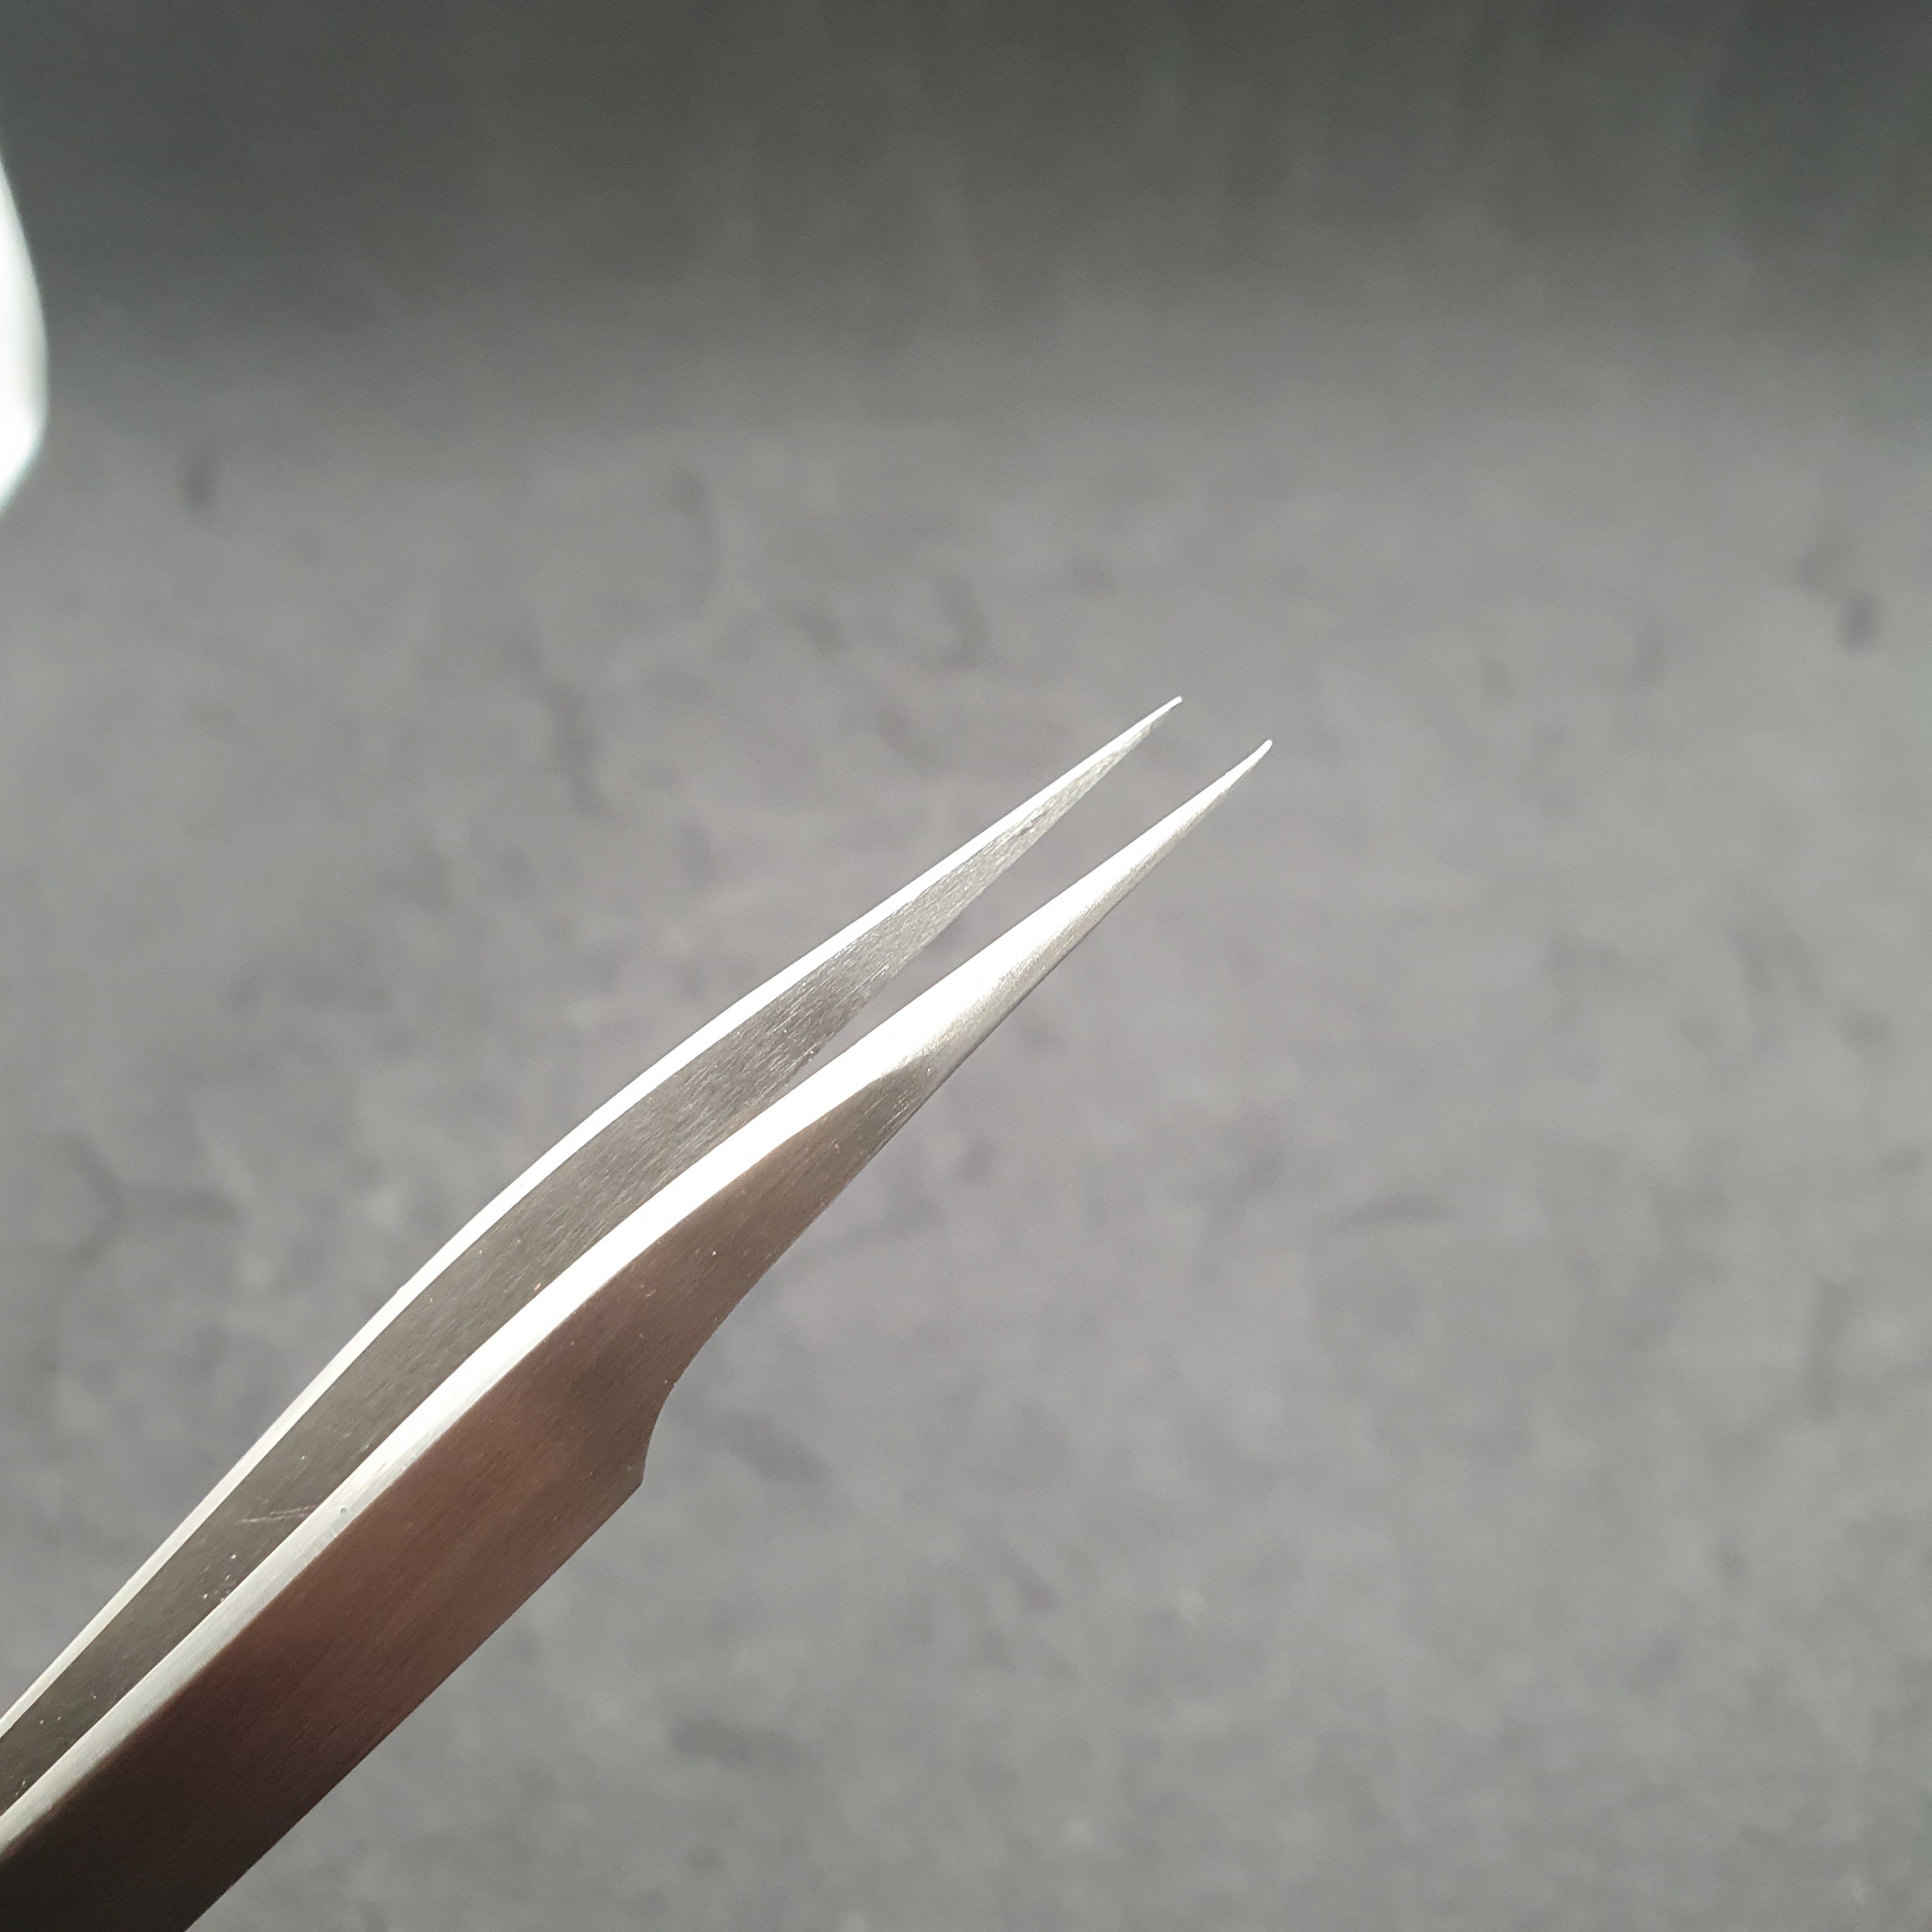 TW 5A CURVED END TWEEZERS - NON MAGNETIC MICRO POINT